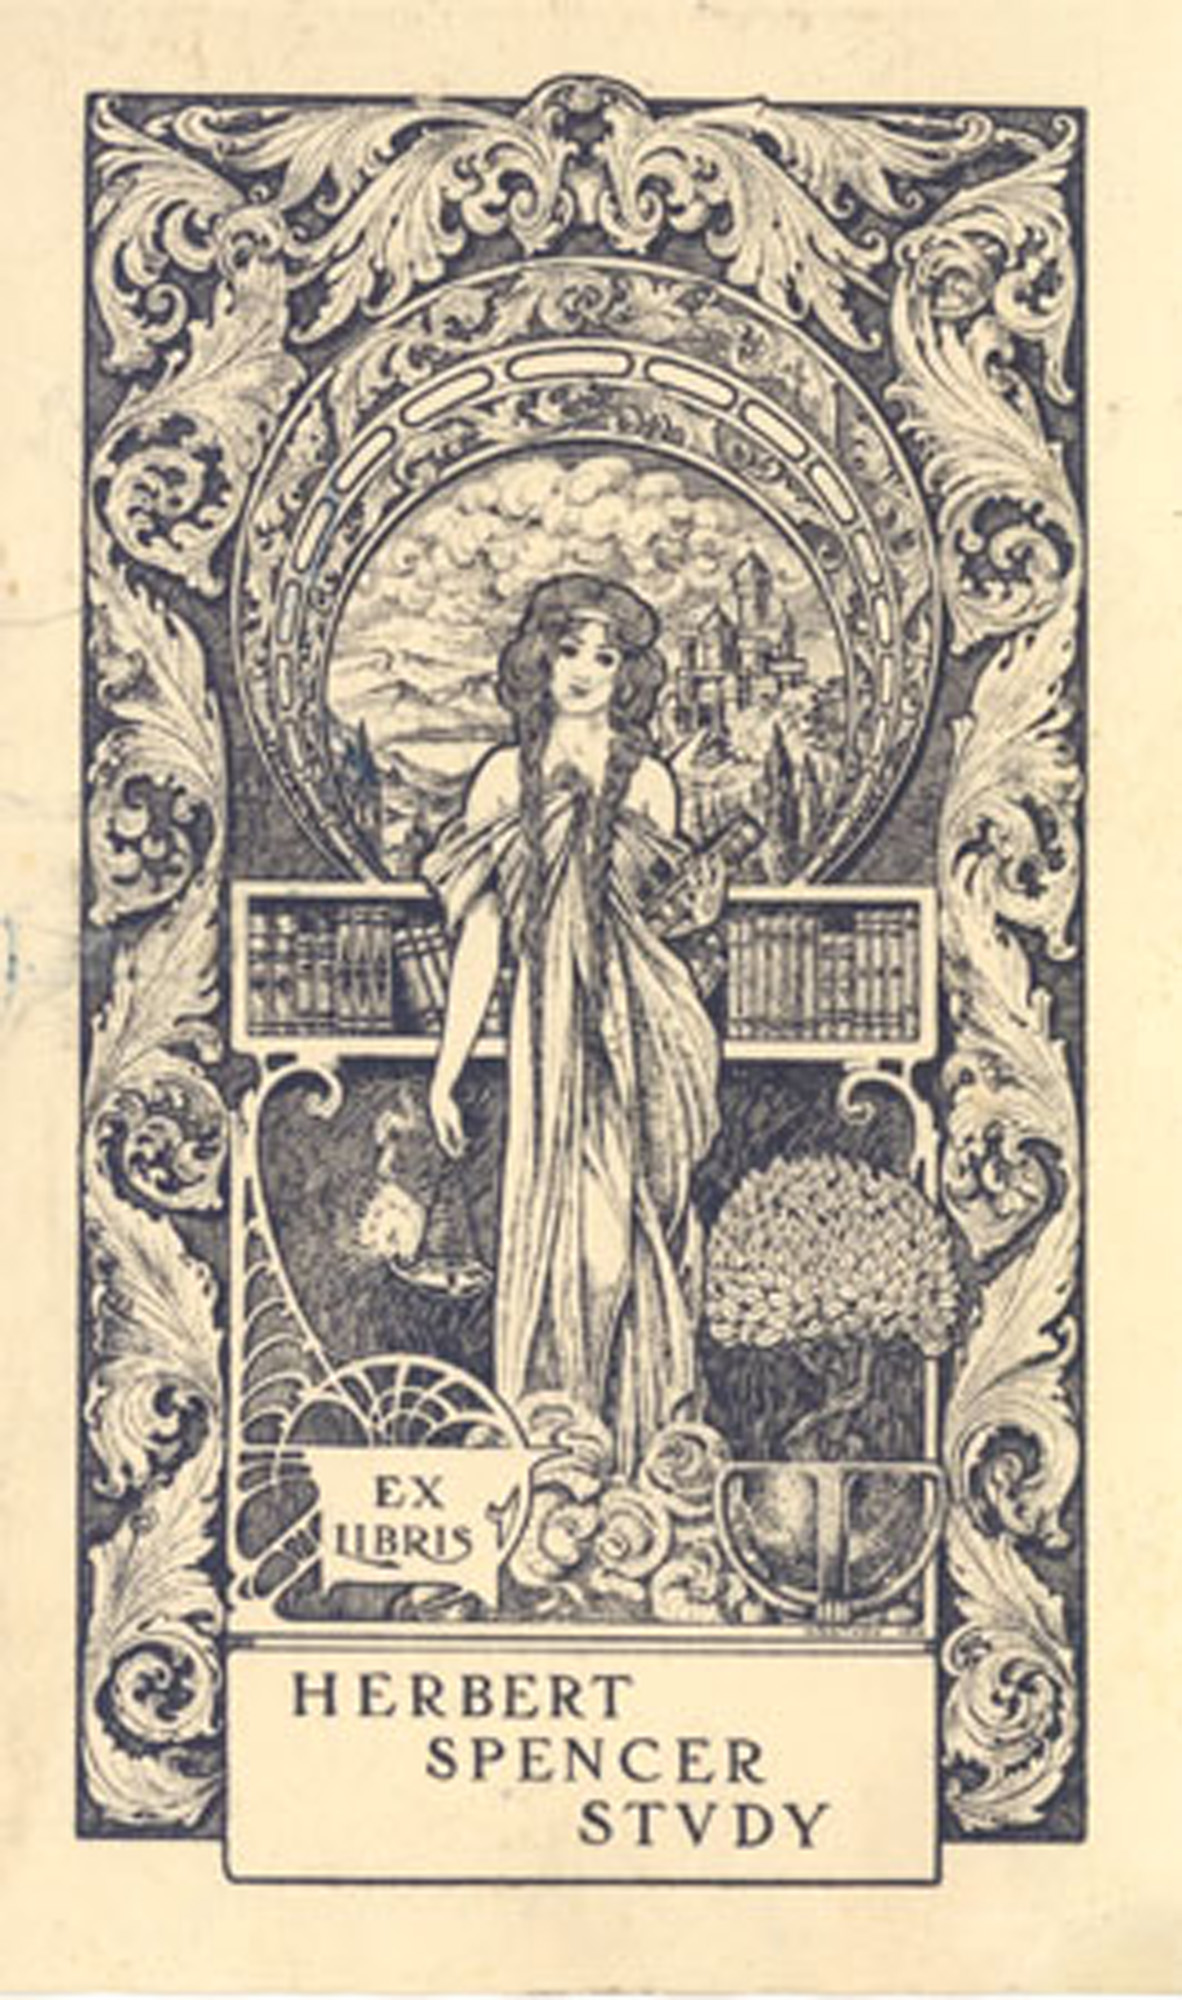 Reminder: No known copyright restrictions. Please credit UBC Library as the image source. For more information see http://digitalcollections.library.ubc.ca/cdm/about. Date: 1910 Notes: Woman is Mnemosyne, personification of memory in Greek mythology, or Vigilanza / Vigilantia wearing a loose gown and with hair tresses. Holding oil-lamp in her left hand, and closed book in her right hand. Flanking the right side of Vigilantia is an olive tree. Behind the torso of Vigilantia is a shelf of books, and behind her head is a landscape with a castle overlooking a lake, surrounded by mountains, and a cloudy sky. Ex Libris part of image. ; Bookplate Type : Pictorial ; Bookplate Function : OwnershipH.S.STVDY 1910 appears in lower-right hand corner above name. ; Personal Source: Original Format: University of British Columbia. Library. Rare Books and Special Collections. Thomas Murray Collection Permanent URL: http://digitalcollections.library.ubc.ca/cdm/ref/collection/bookplate/id/193